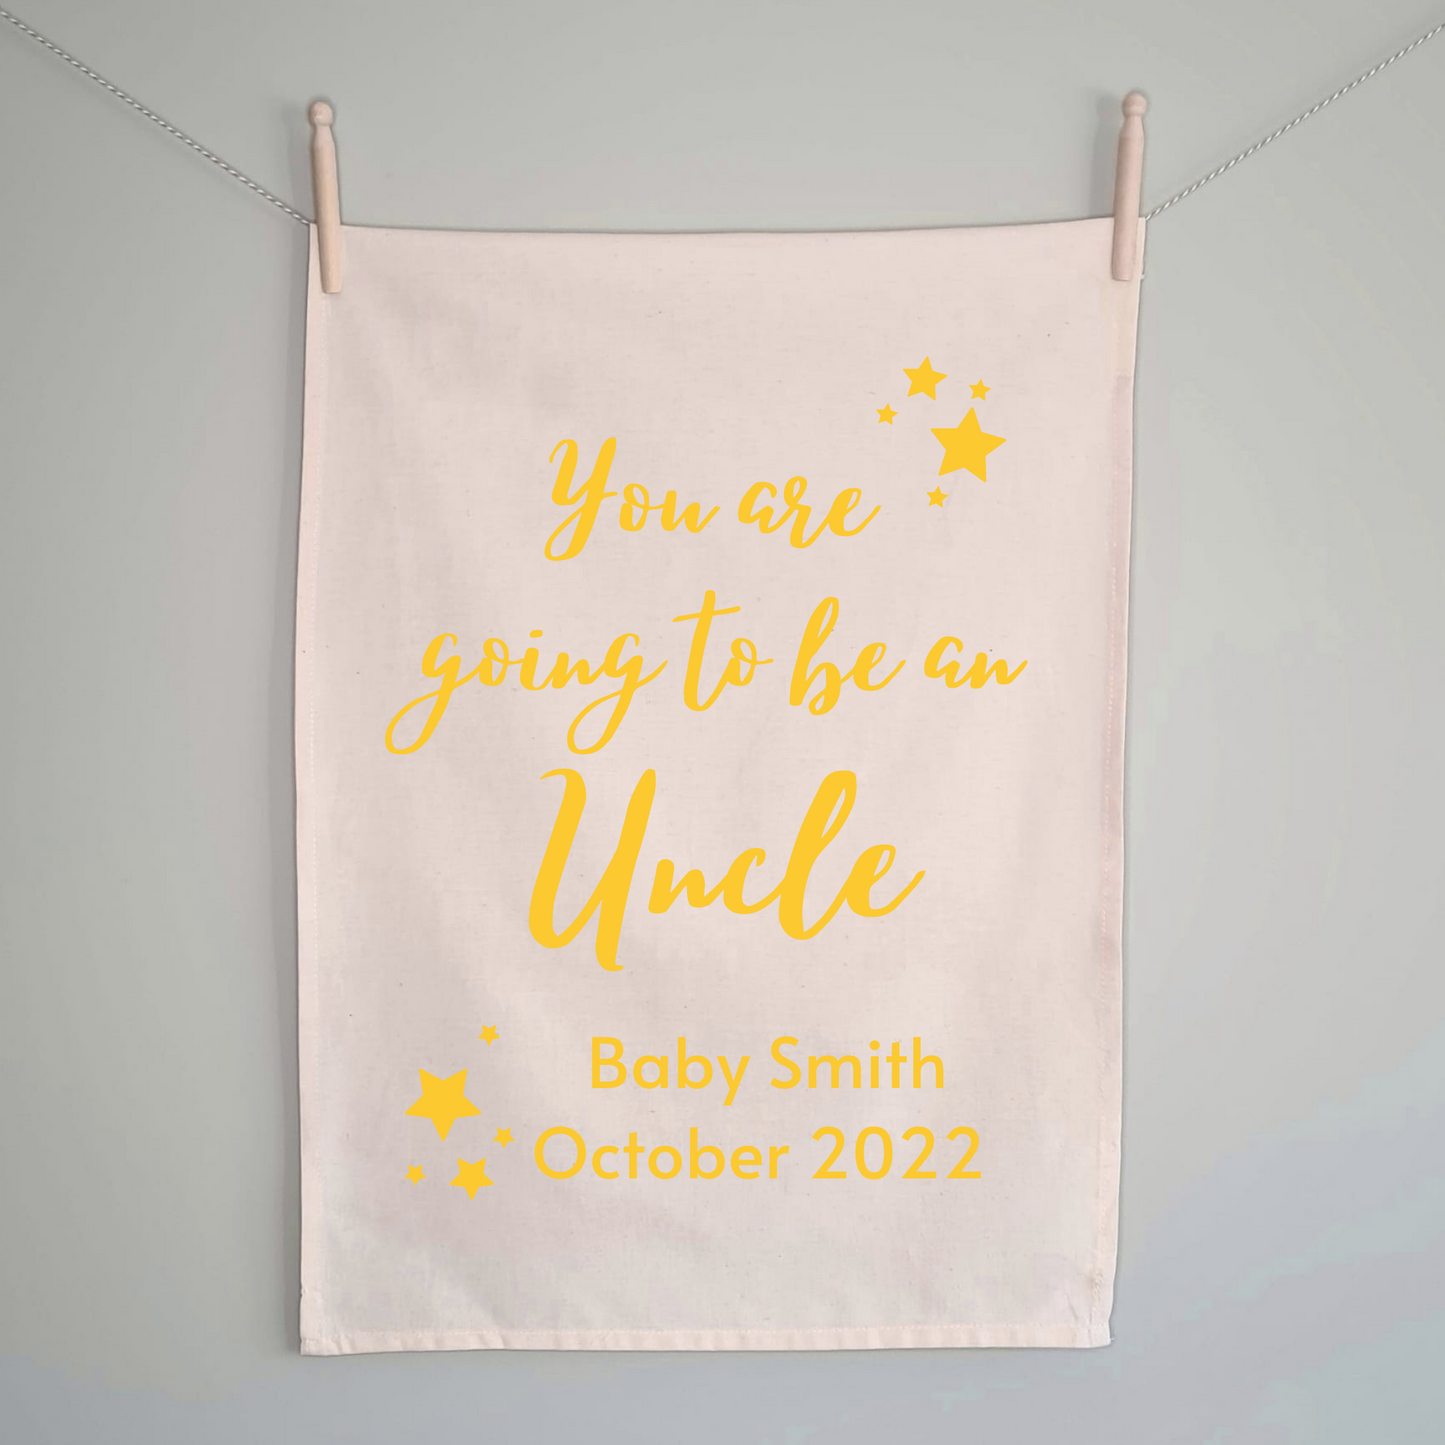 You Are Going To Be A Grandad Tea Towel - 100% Organic Cotton